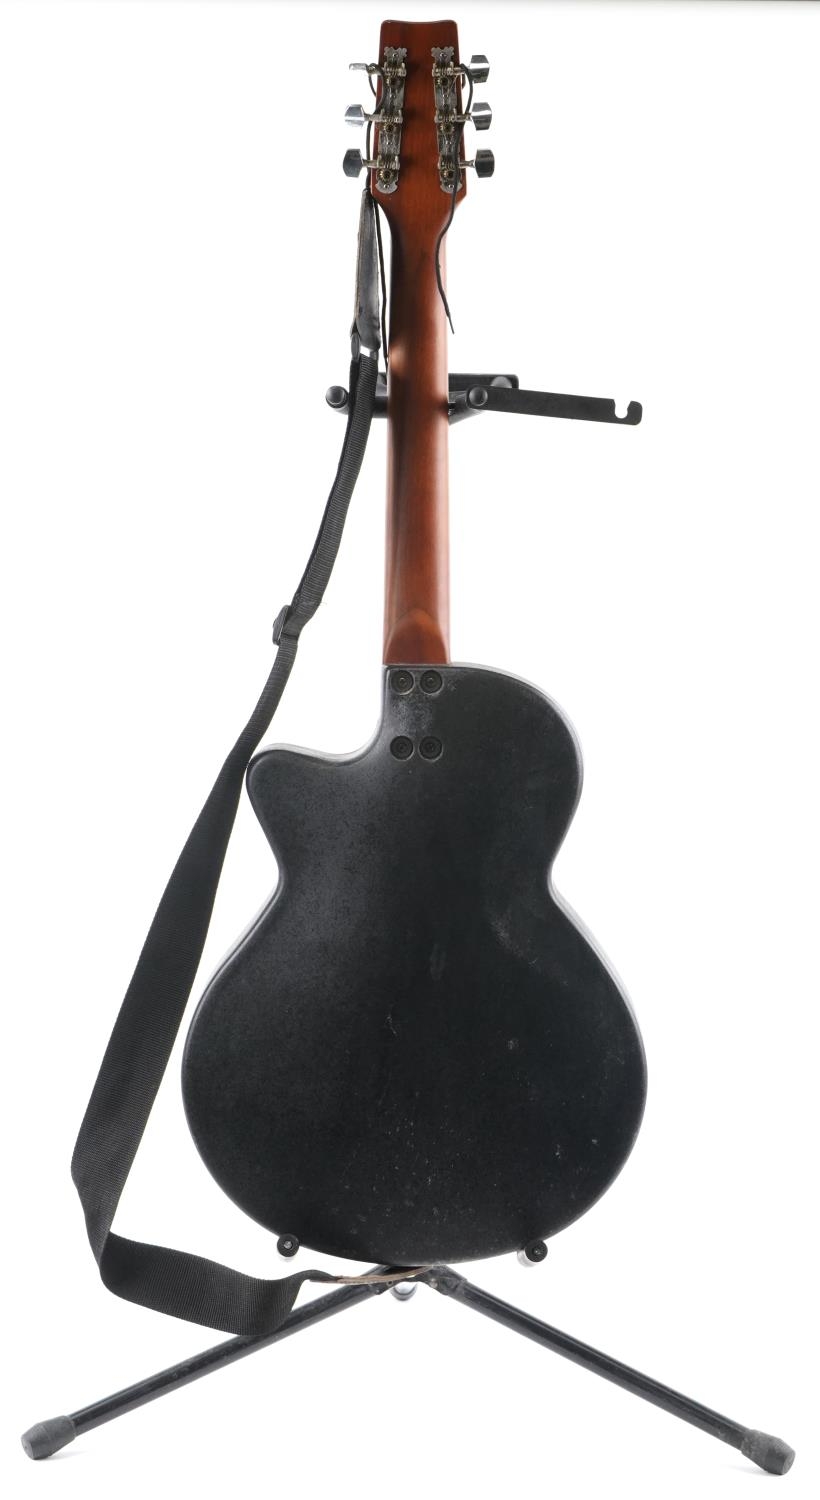 Melody six string acoustic guitar with Stagg guitar stand, the guitar 96cm in length - Image 3 of 6